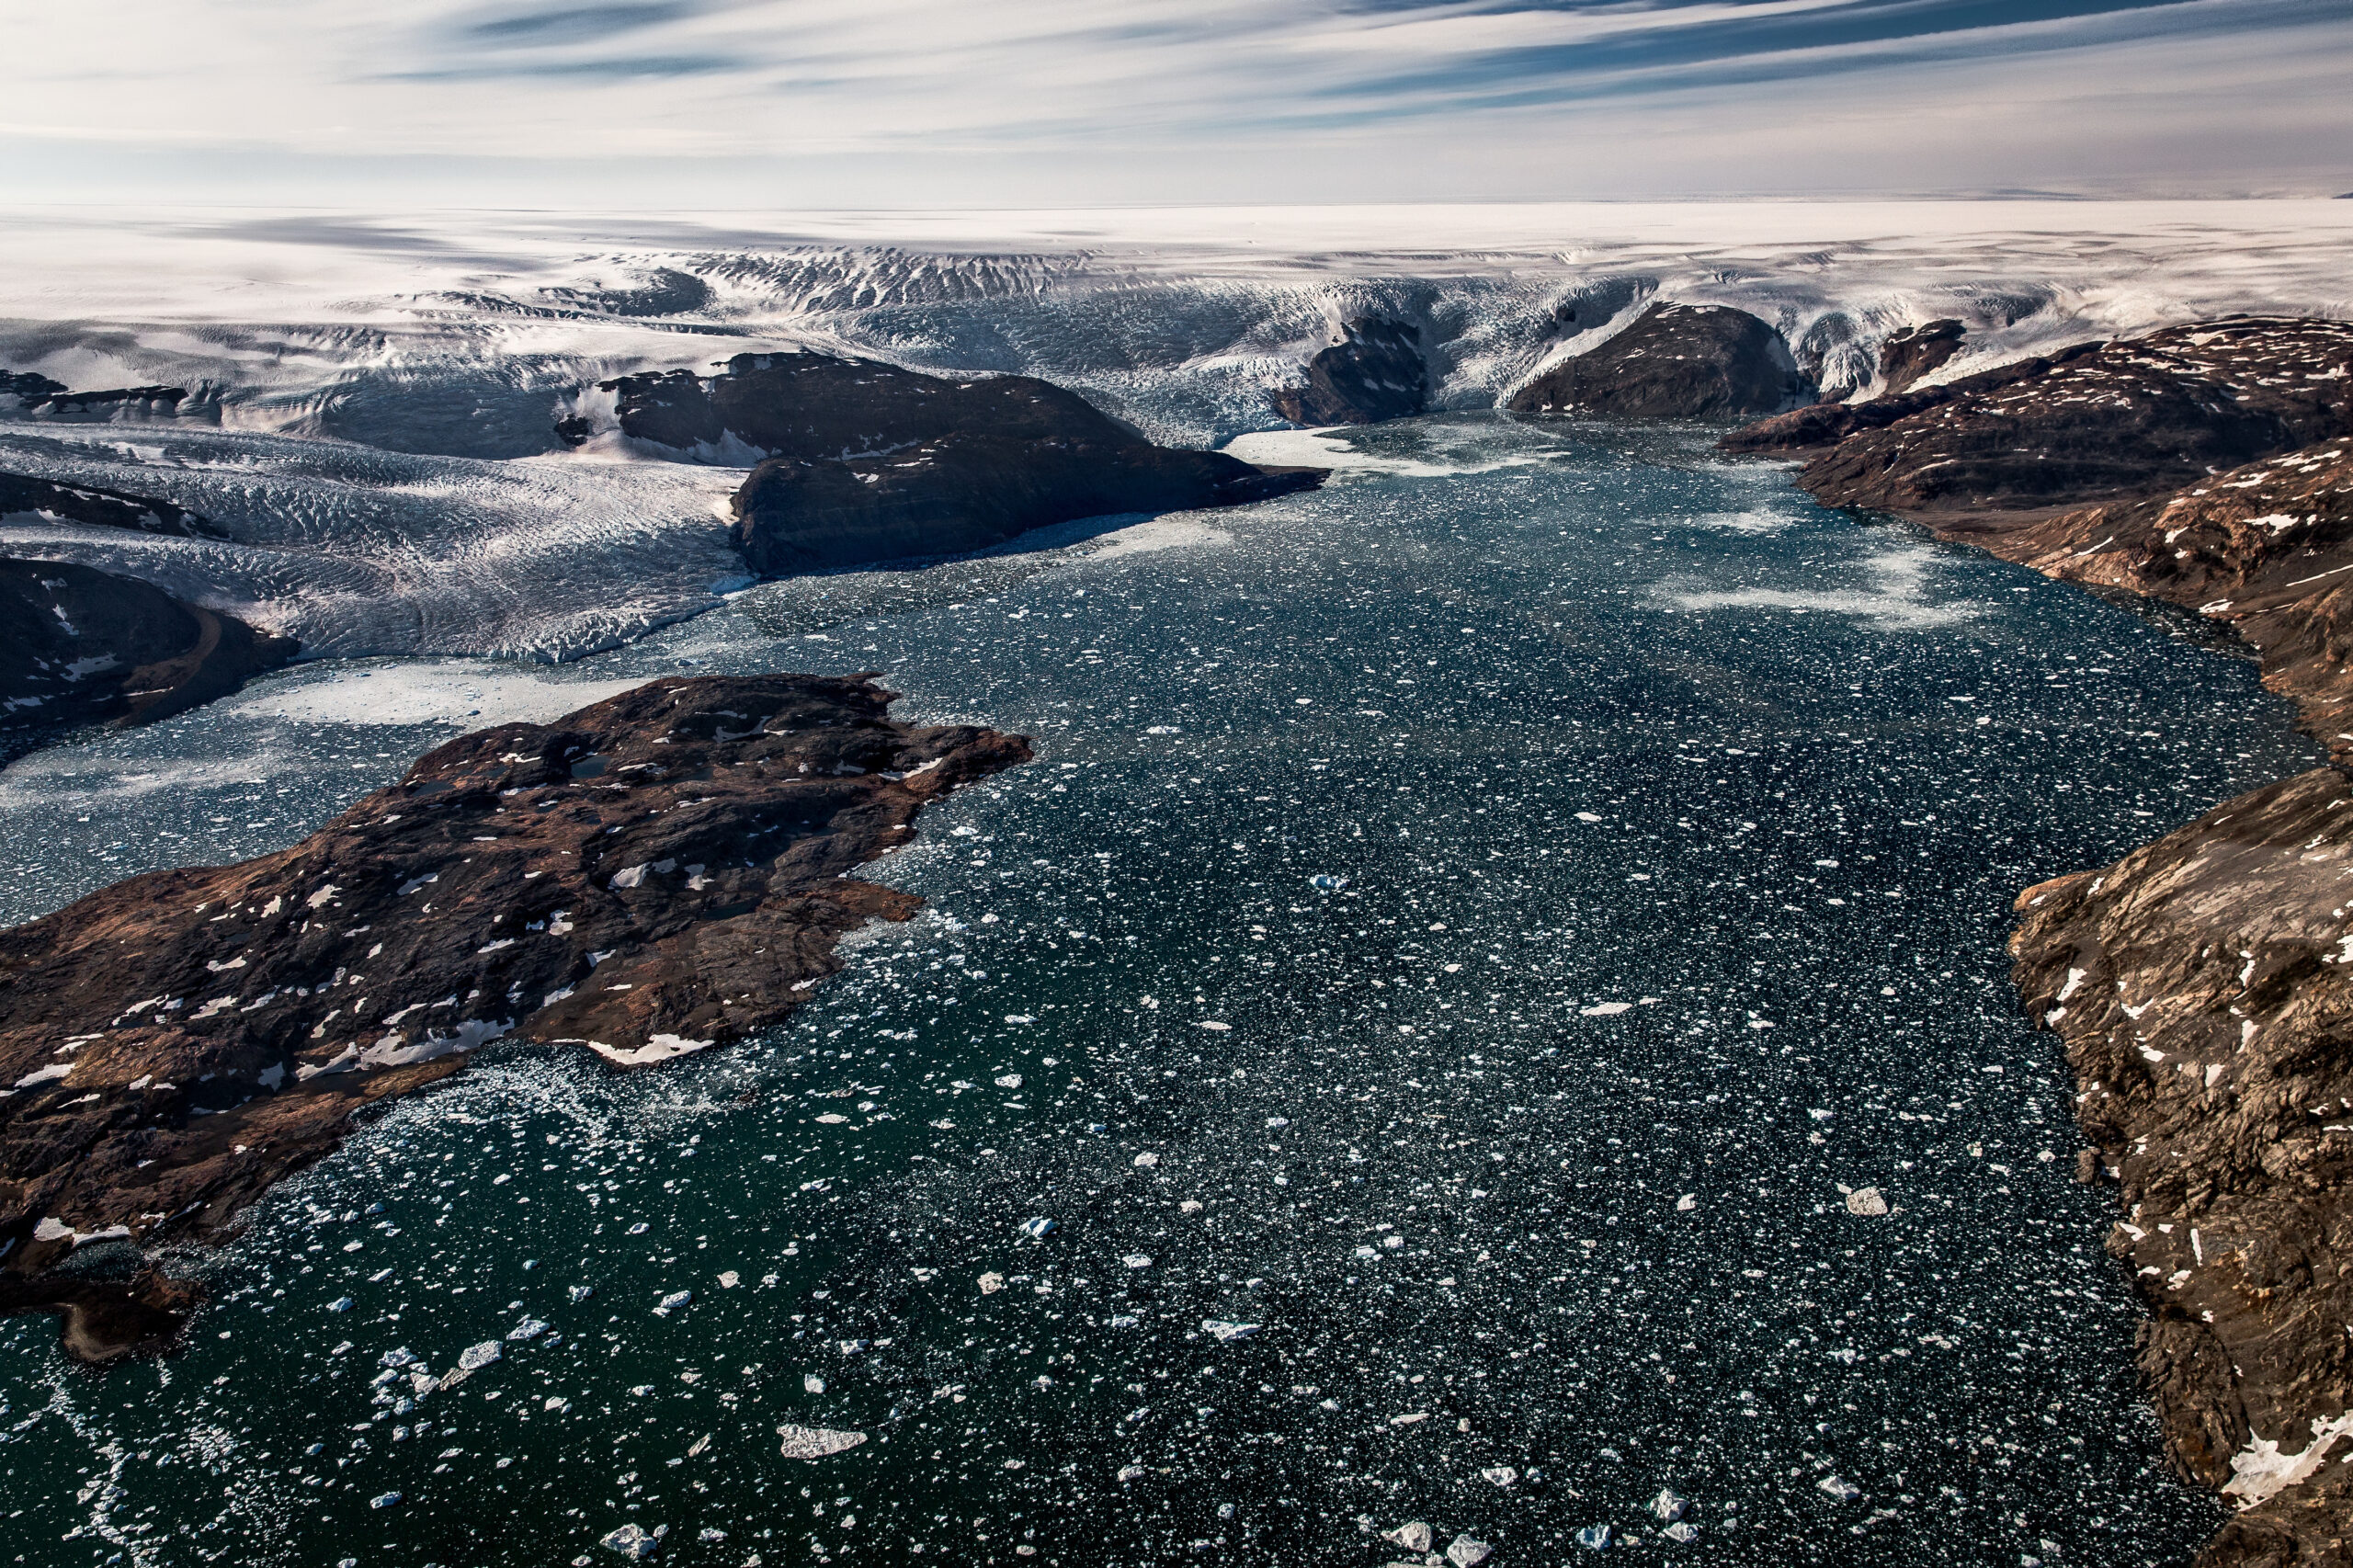 Five glaciers in Johan Petersens Fjord in East Greenland flow from the Greenland Ice Sheet. Photo by Mads Pihl / Air Zafari - Visit Greenland